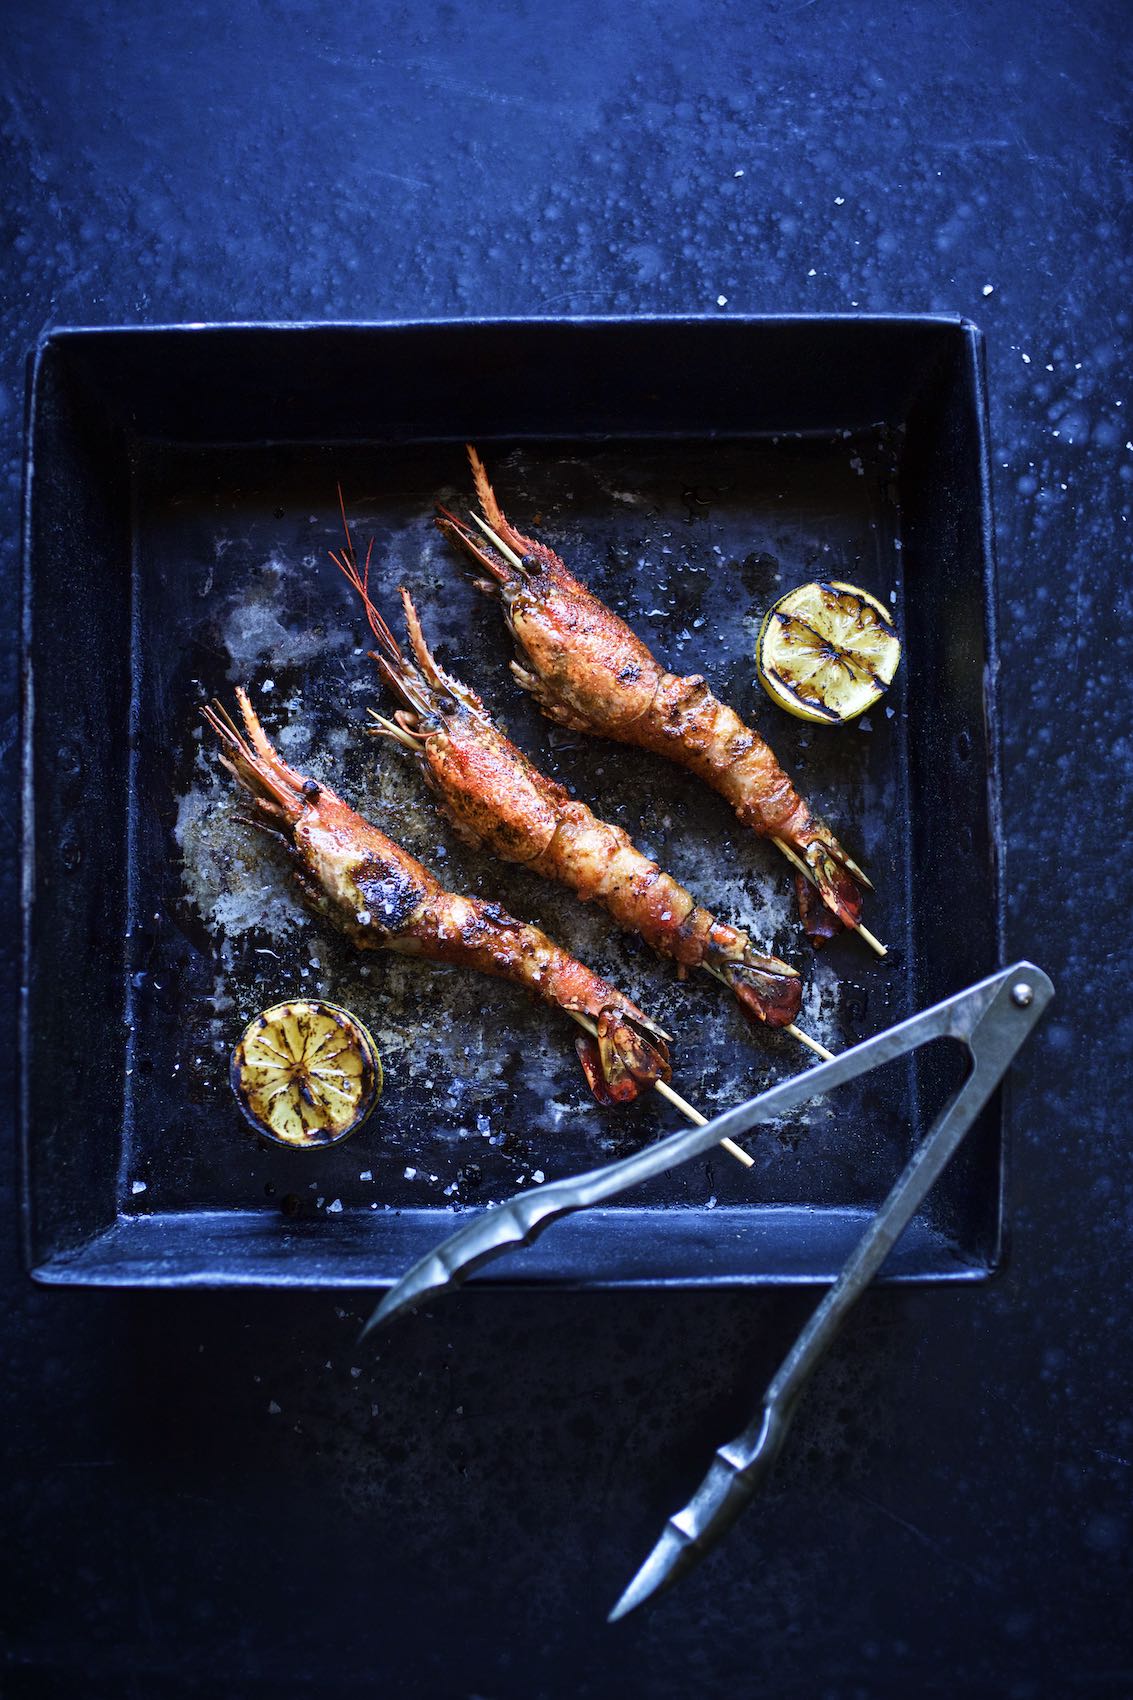 Jody Horton Photography - Skewered, head-on prawns and grilled lemon in rustic, black dish. 